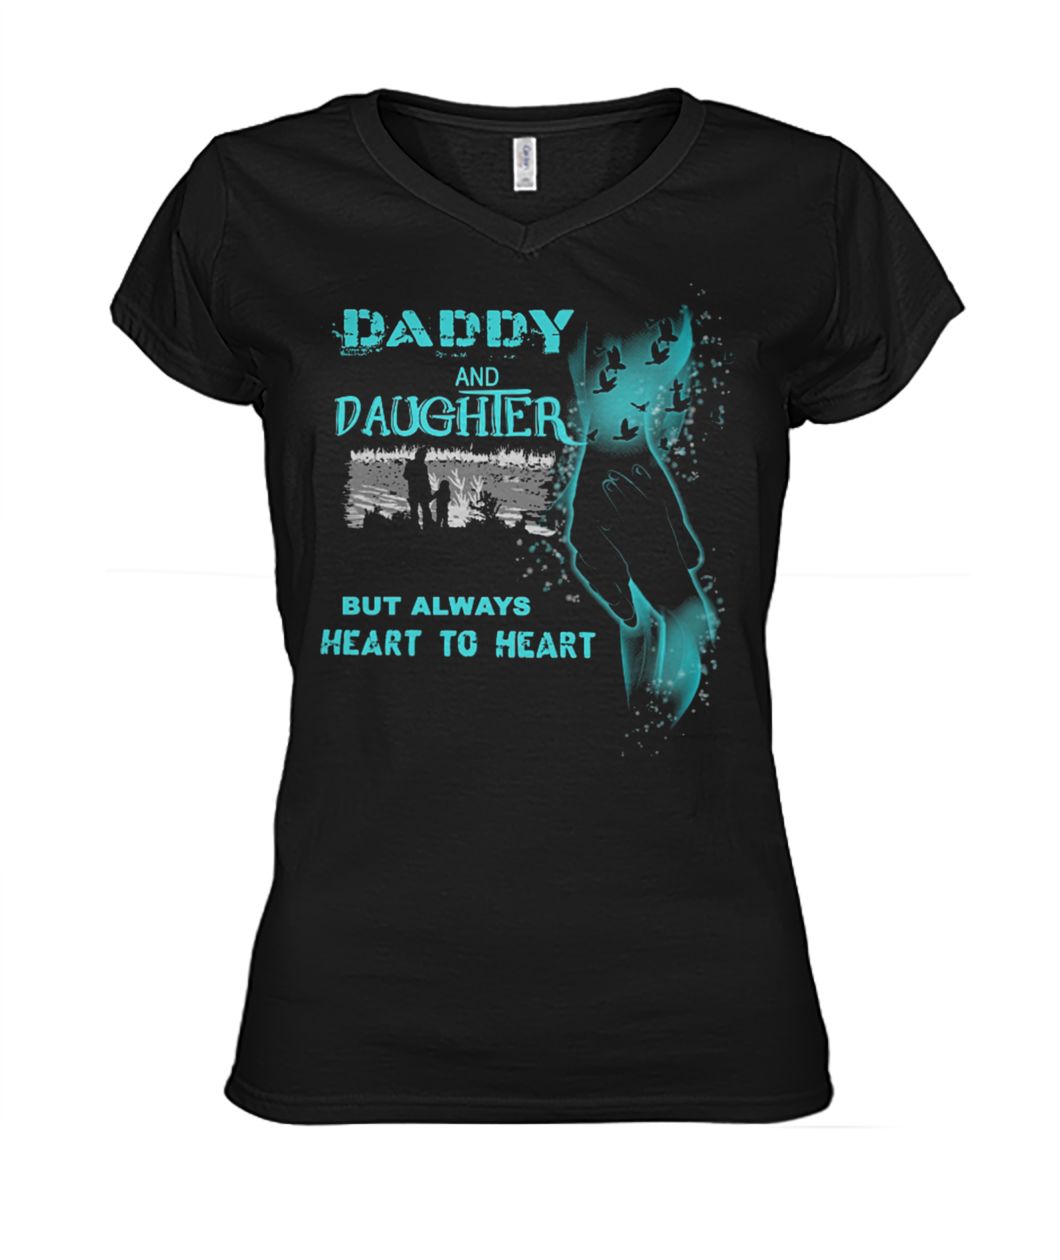 Daddy and daughter but always heart to heart women's v-neck